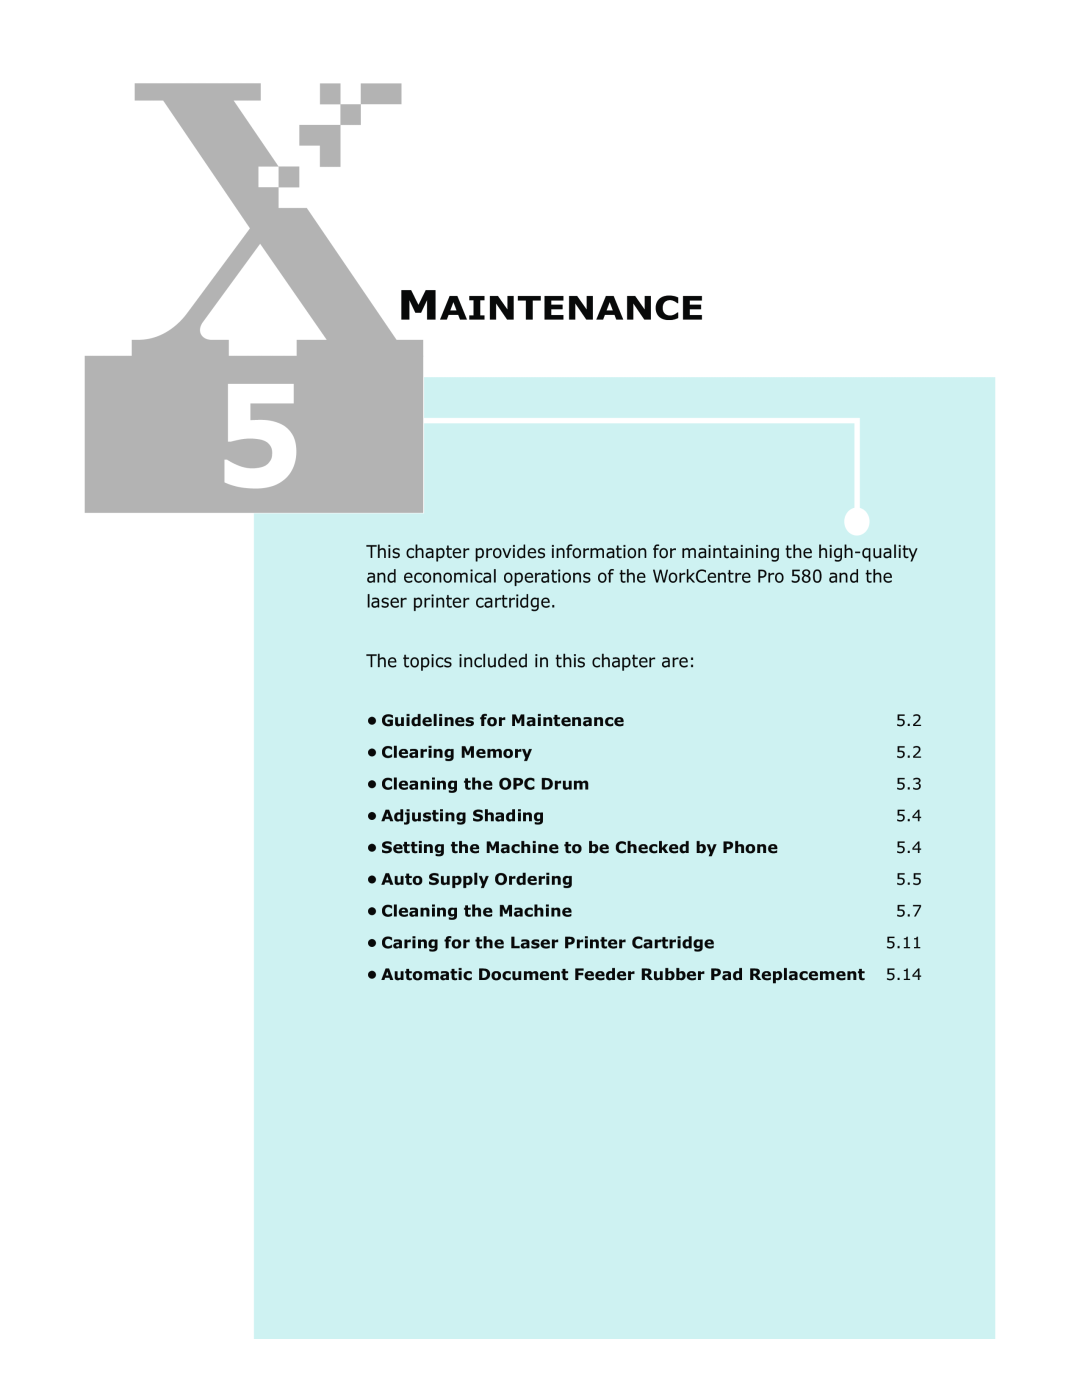 Xerox Pro 580 manual Maintenance, The topics included in this chapter are 